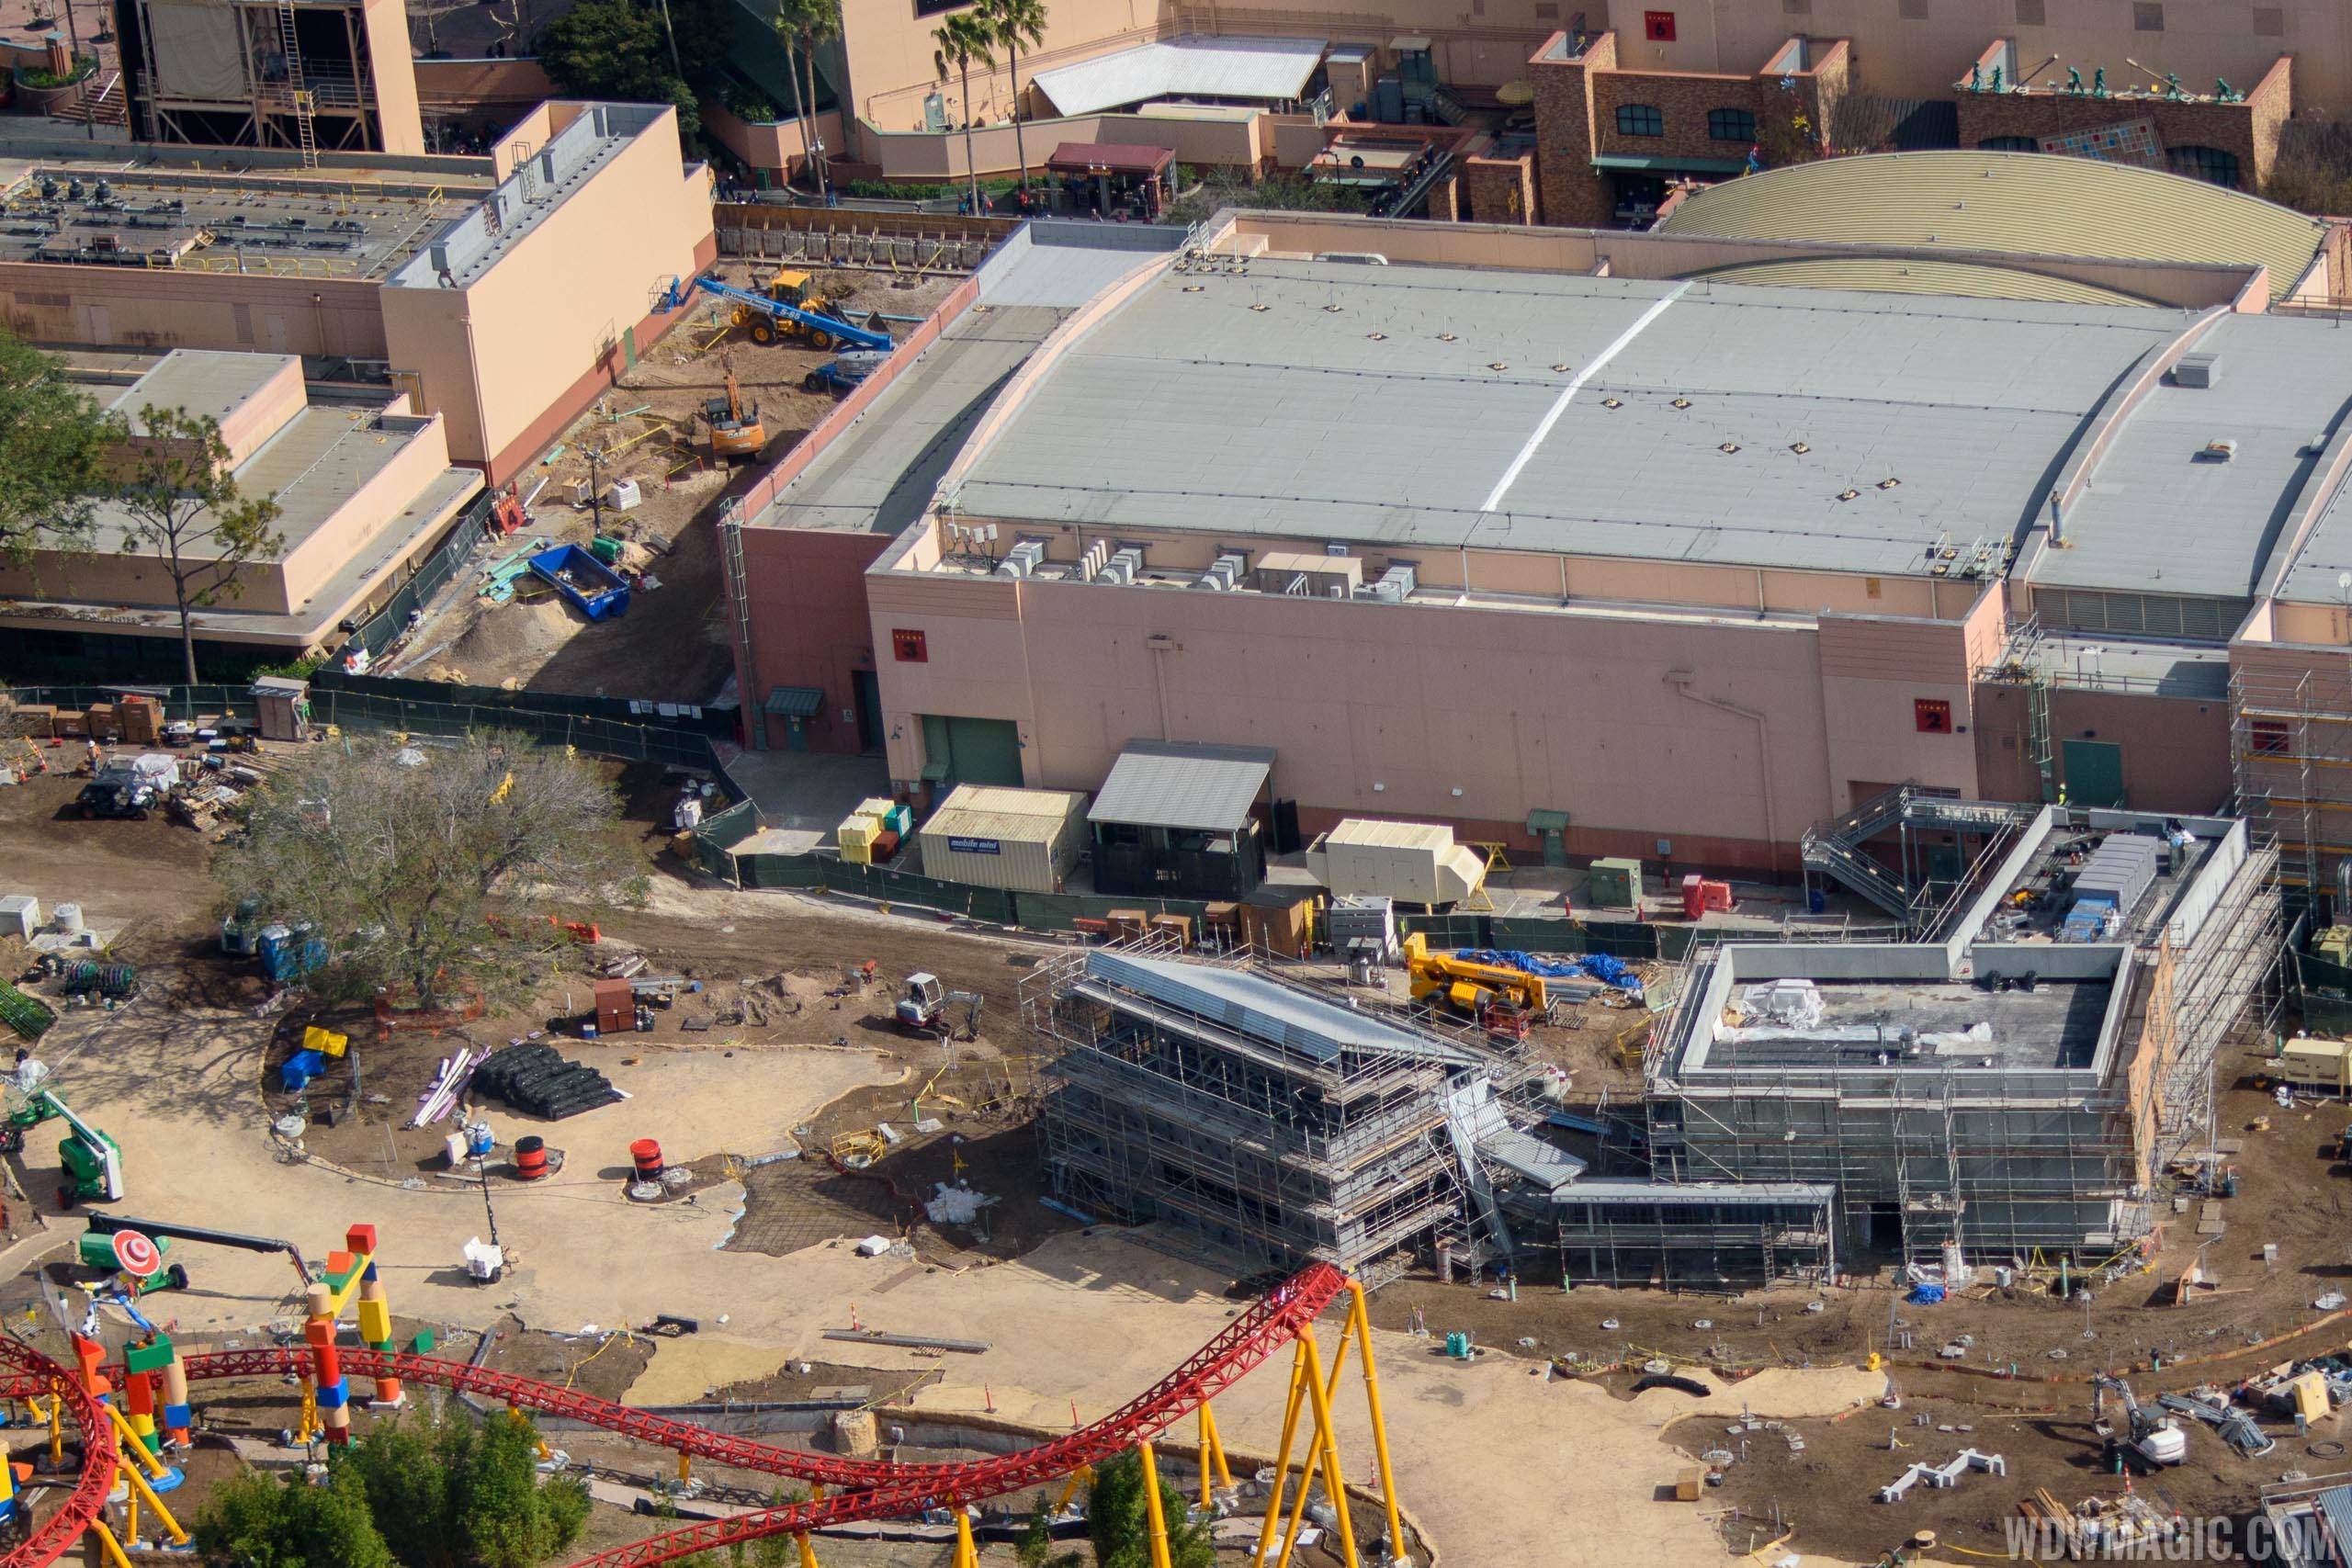 Entrance to Toy Story Land top left, and Entrance to Toy Story Mania right